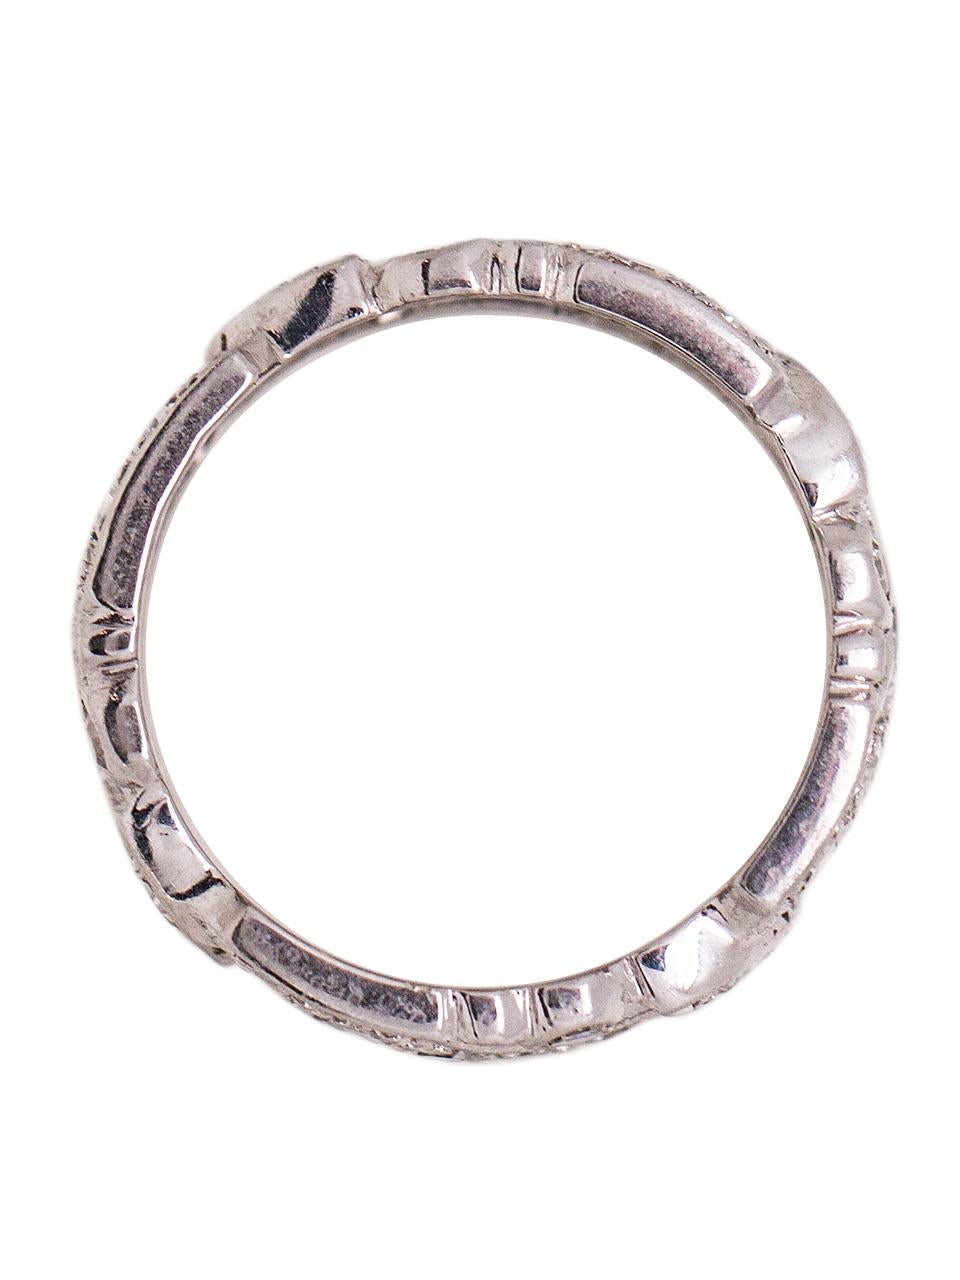 Round Cut Midcentury Platinum and Diamond Wide Eternity Band, circa 1940s-1950s For Sale